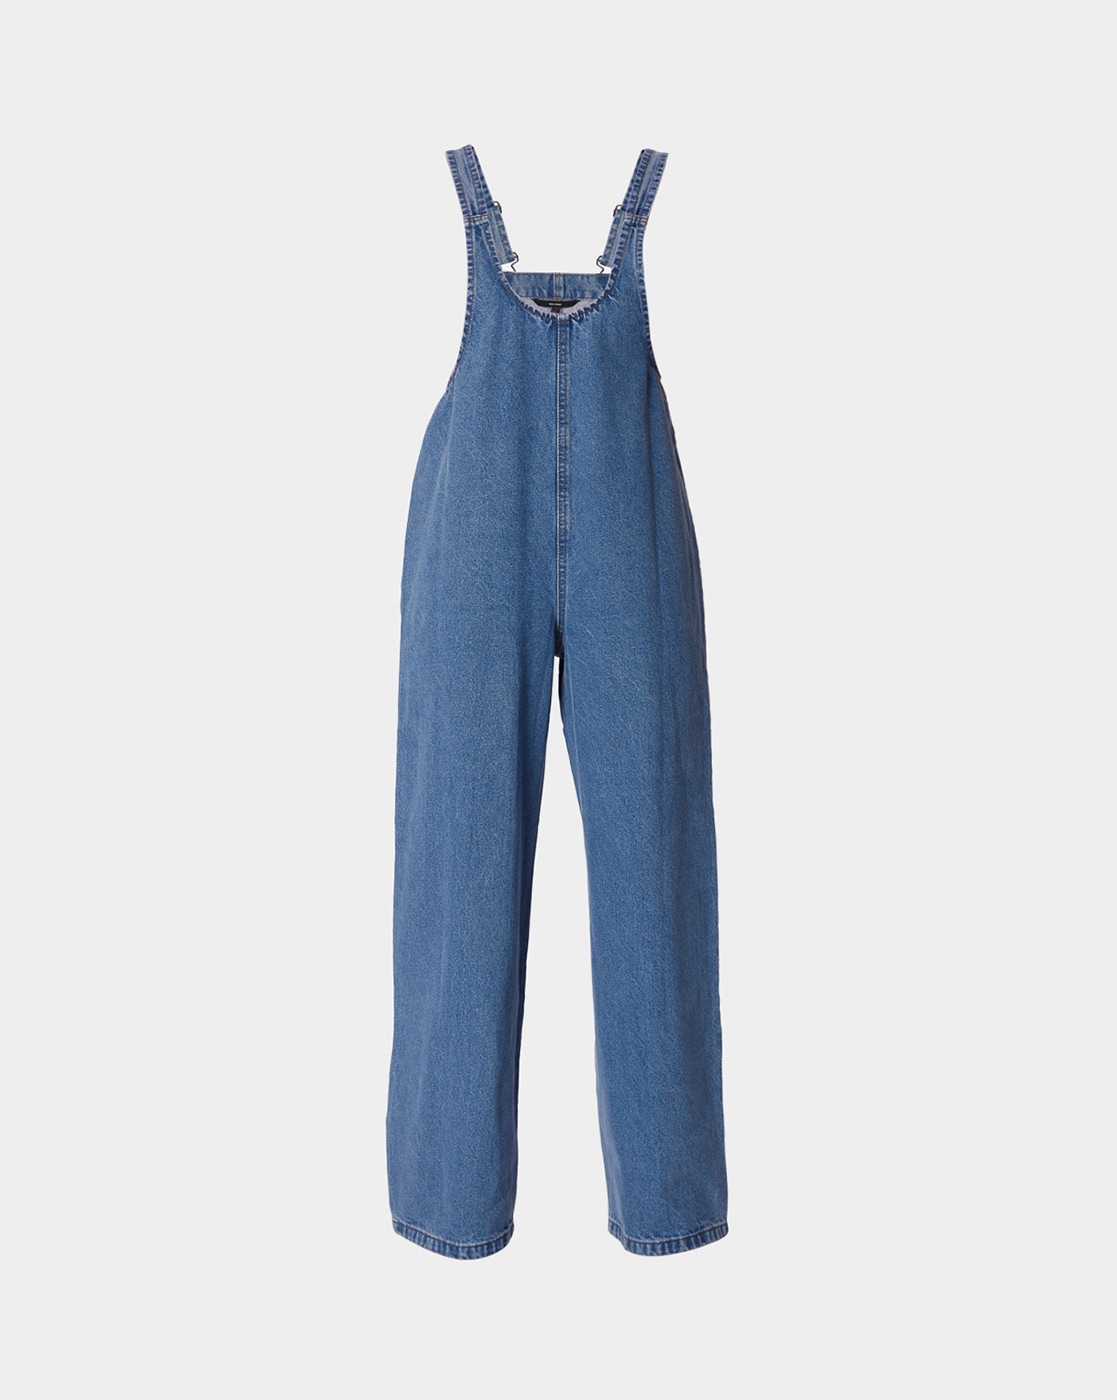 Flap Pockets Wide Leg Dungarees Distressed Jean Overalls